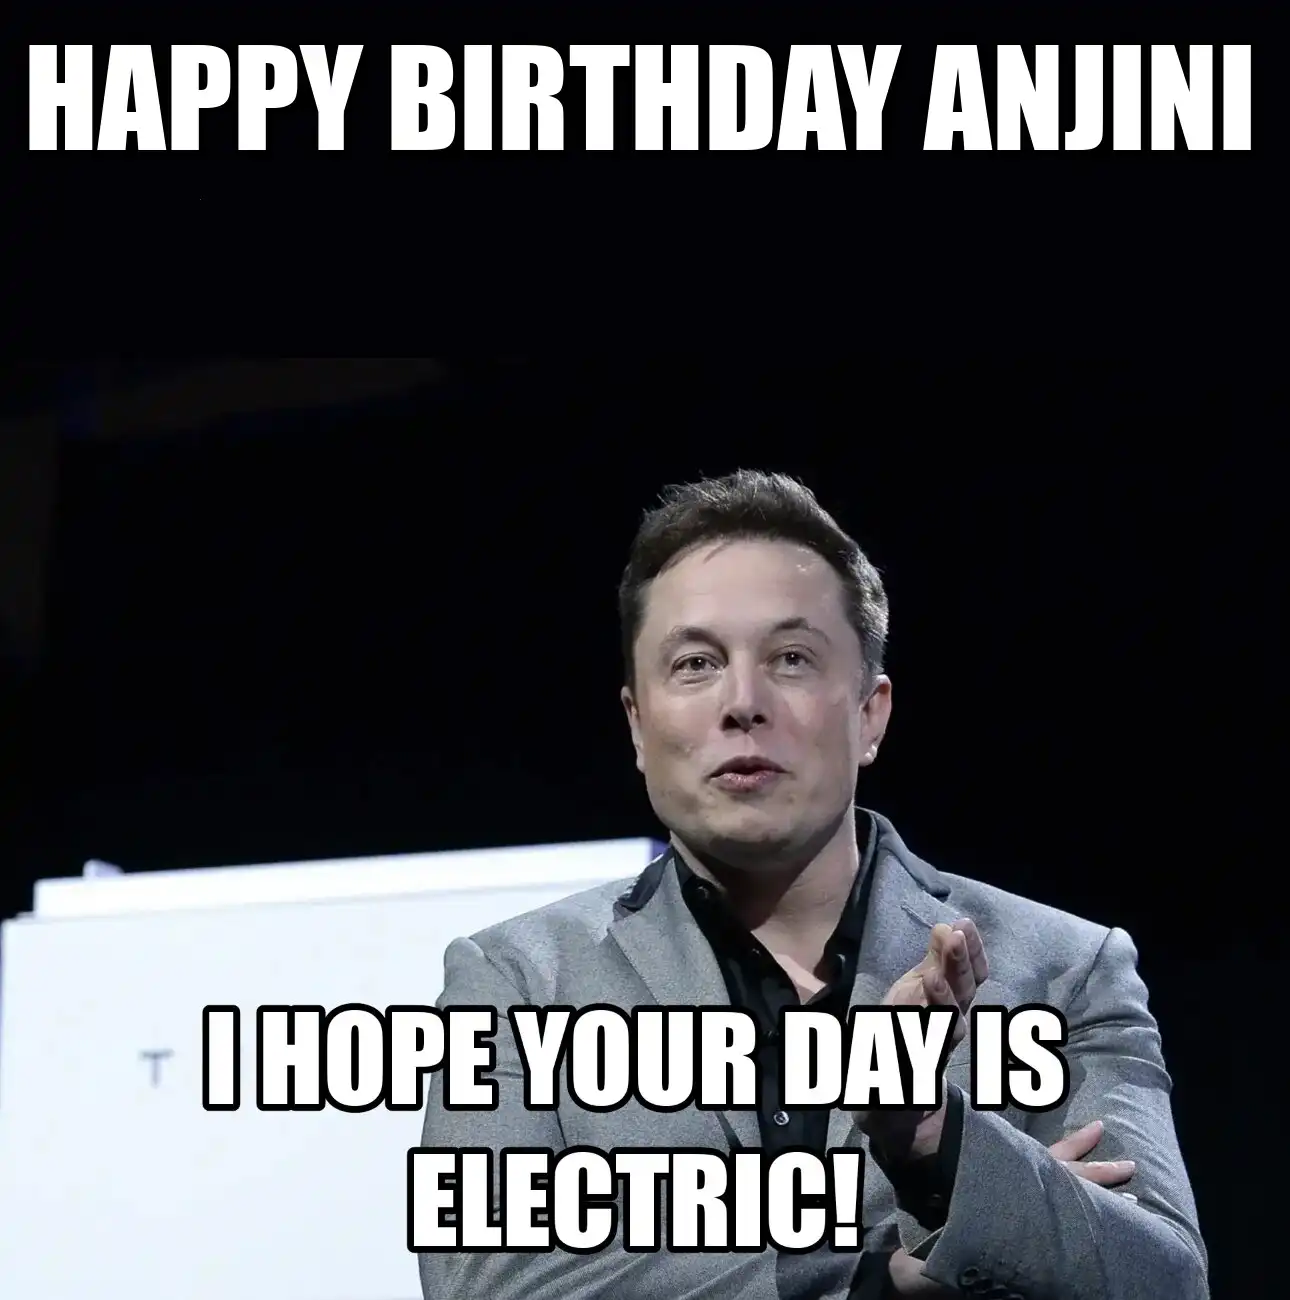 Happy Birthday Anjini I Hope Your Day Is Electric Meme